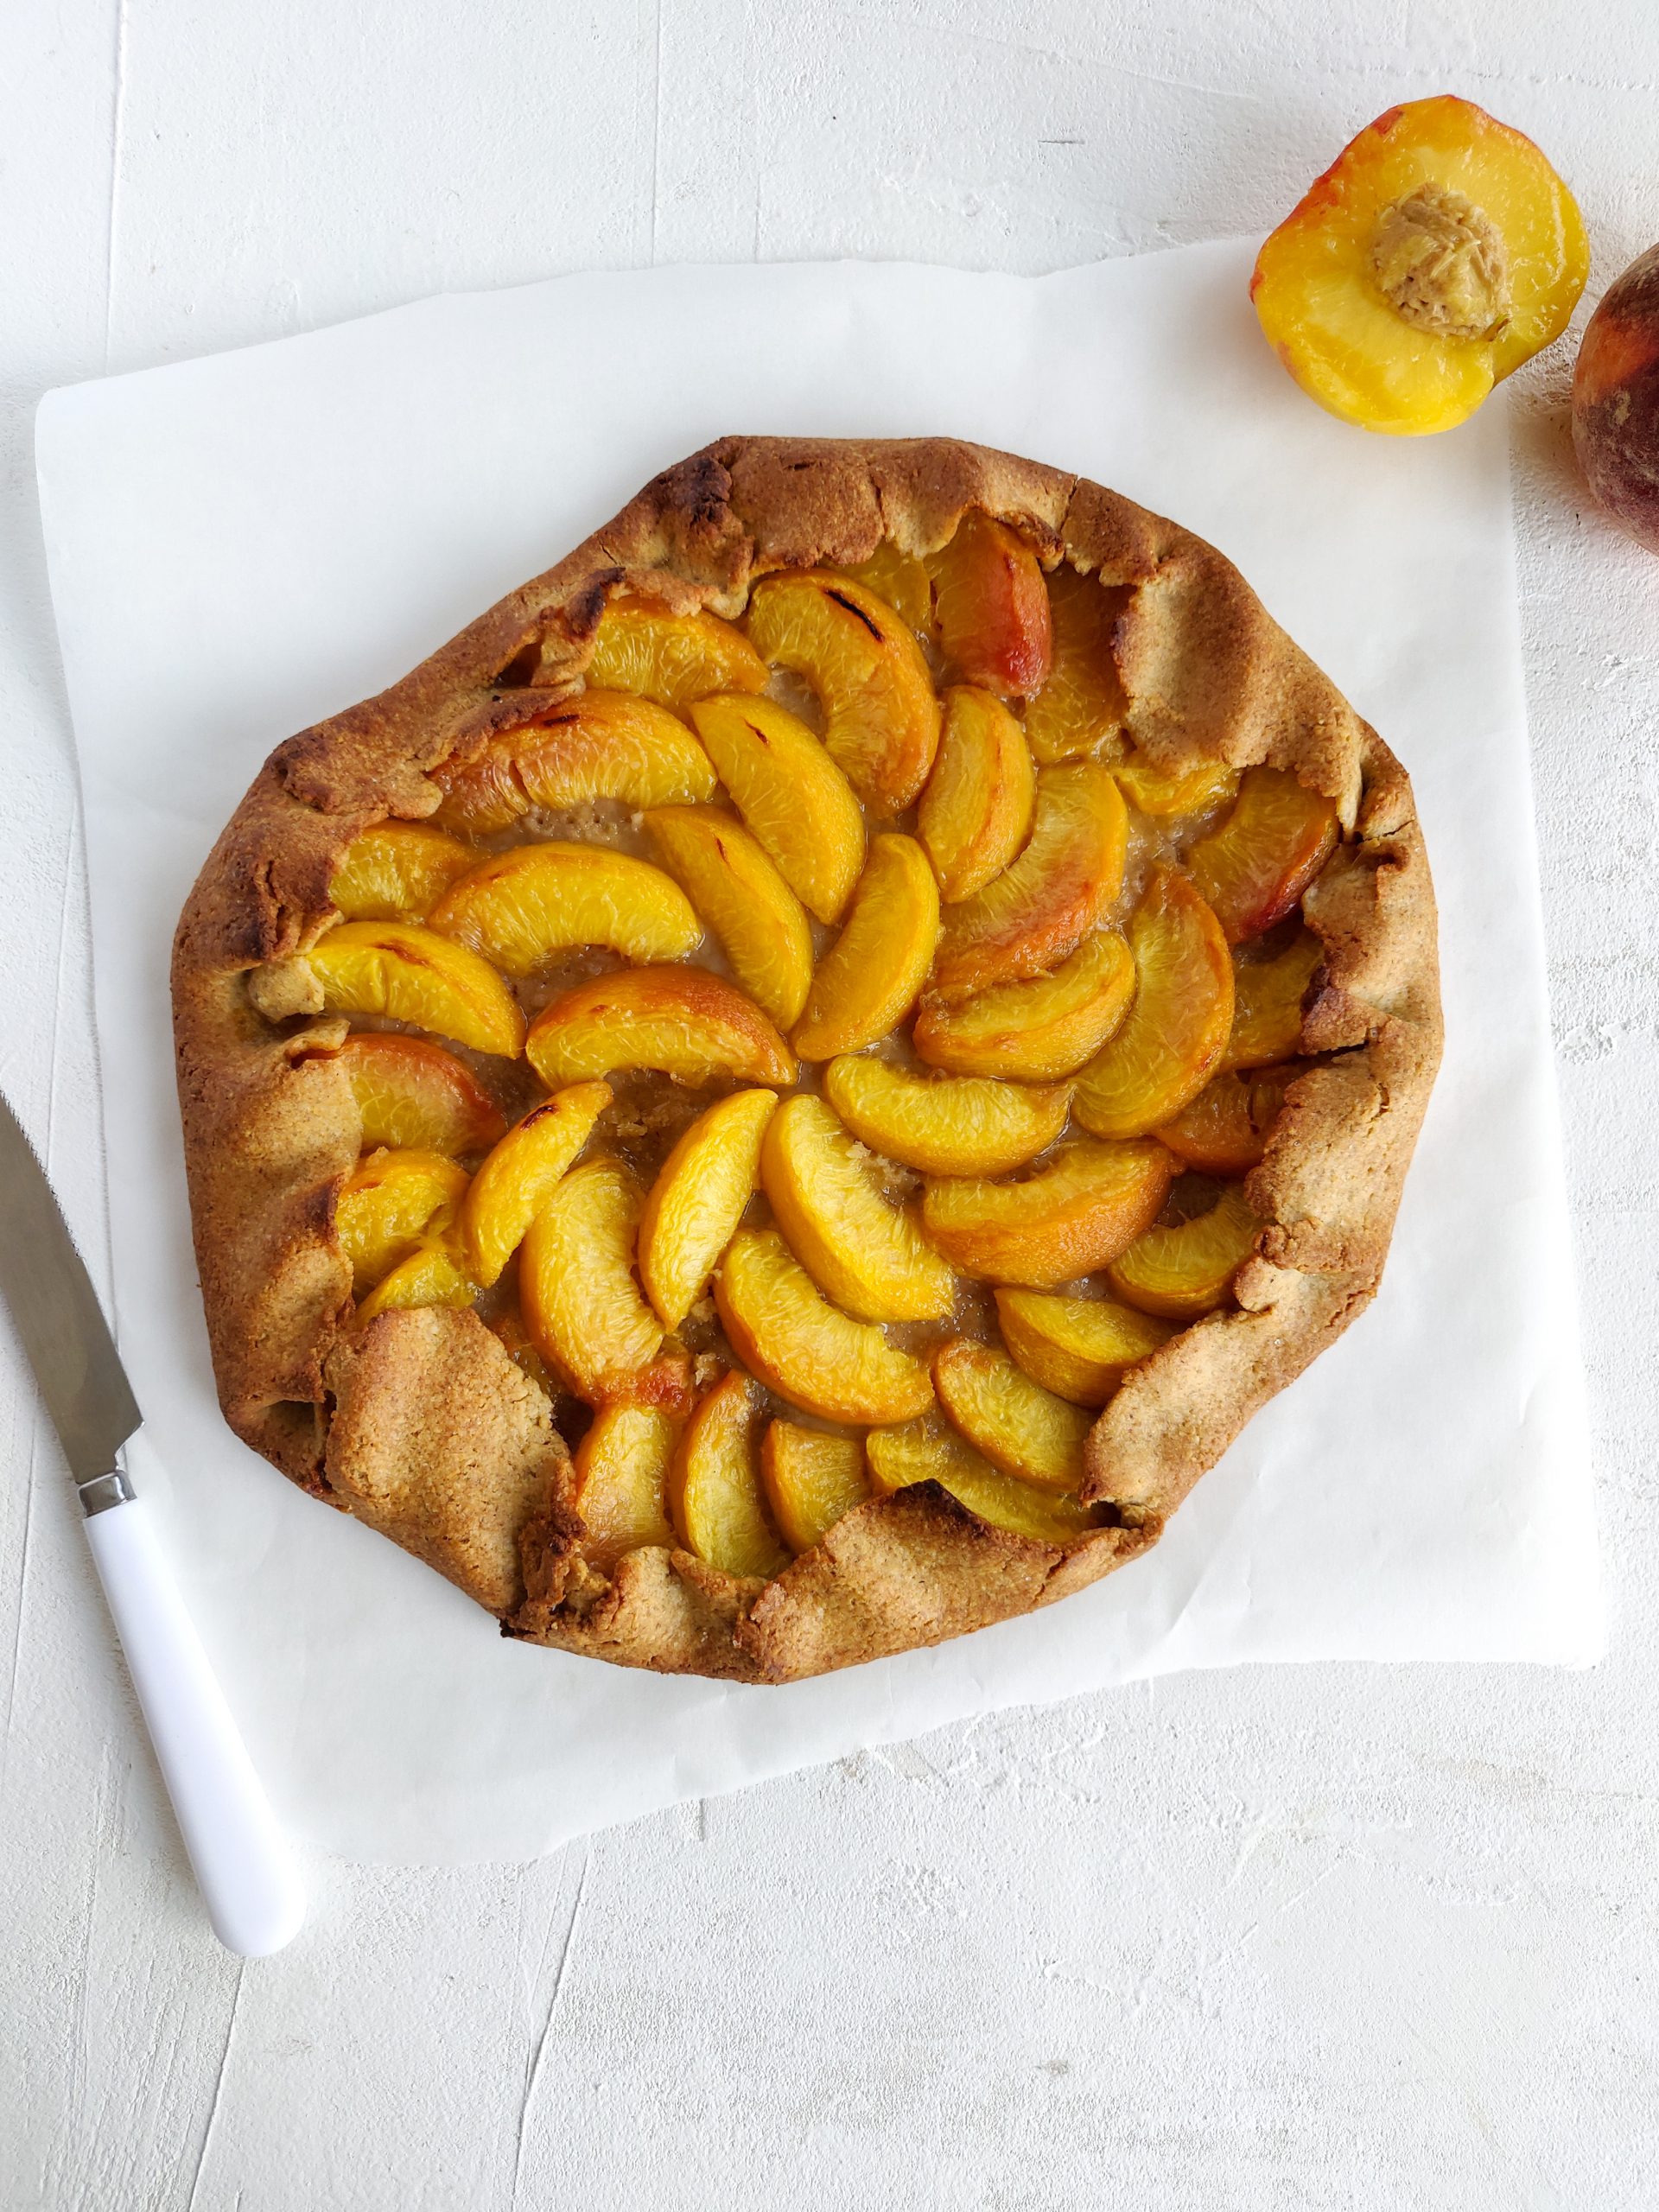 You are currently viewing Tarte rustique aux nectarines